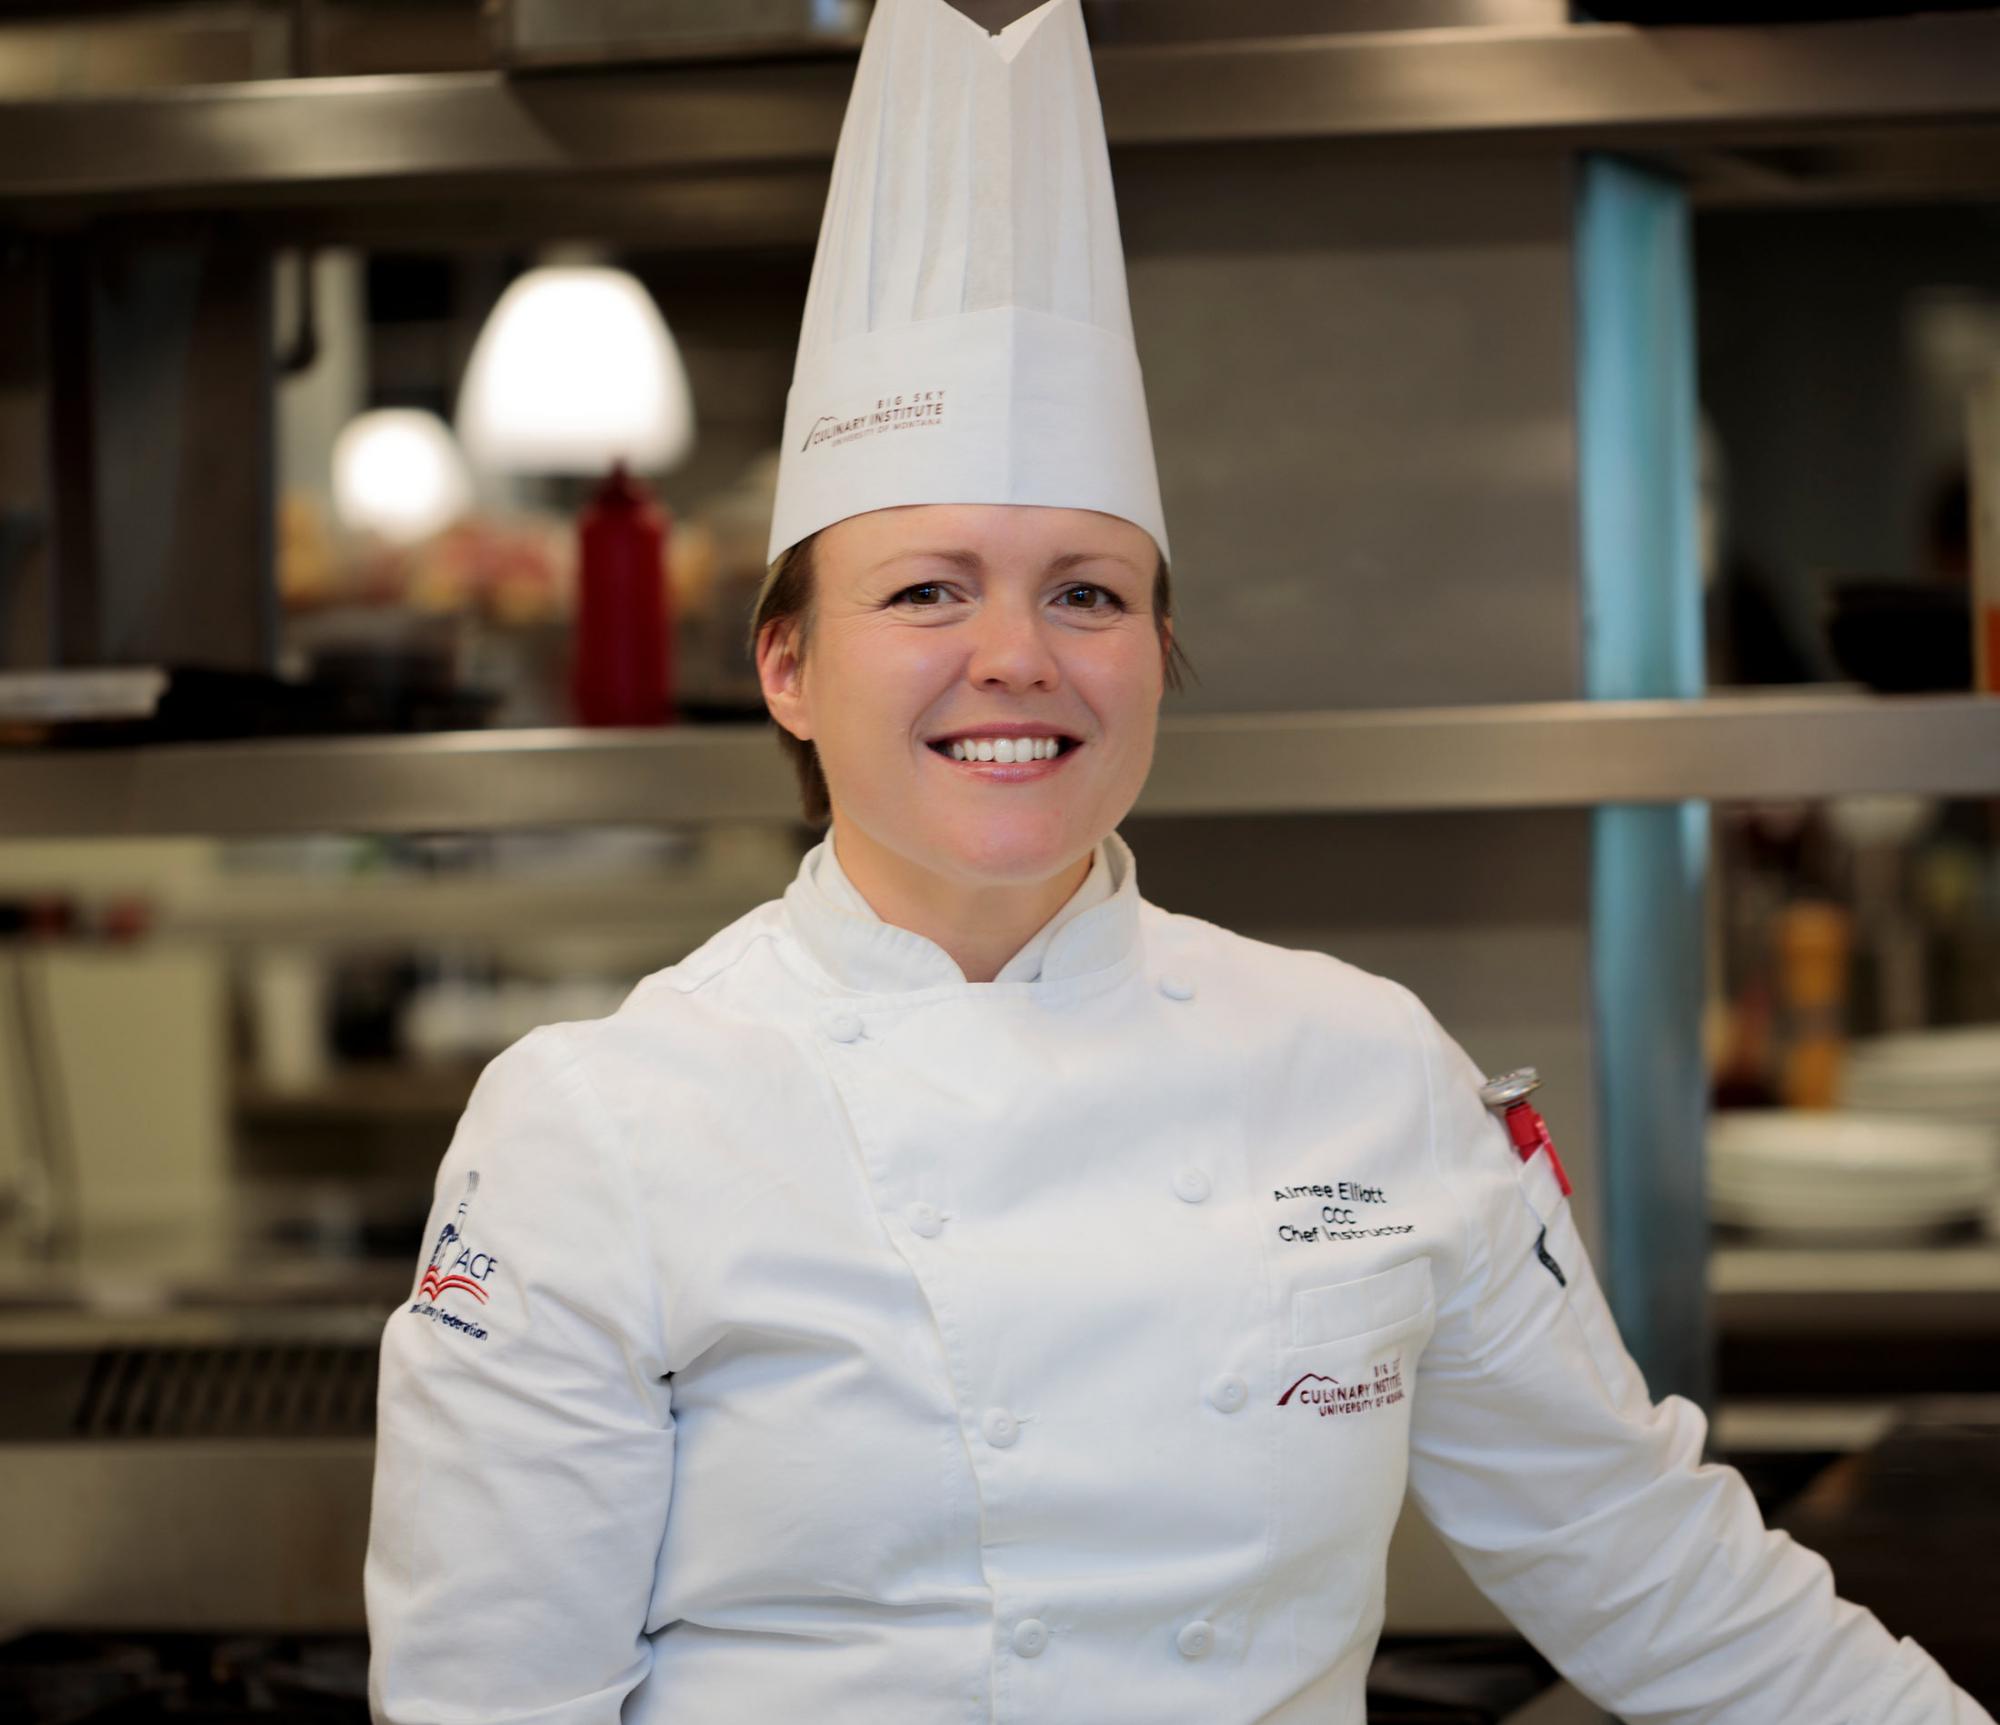 Aimee (Ault) Elliot in uniform at the Big Sky Culinary Institute